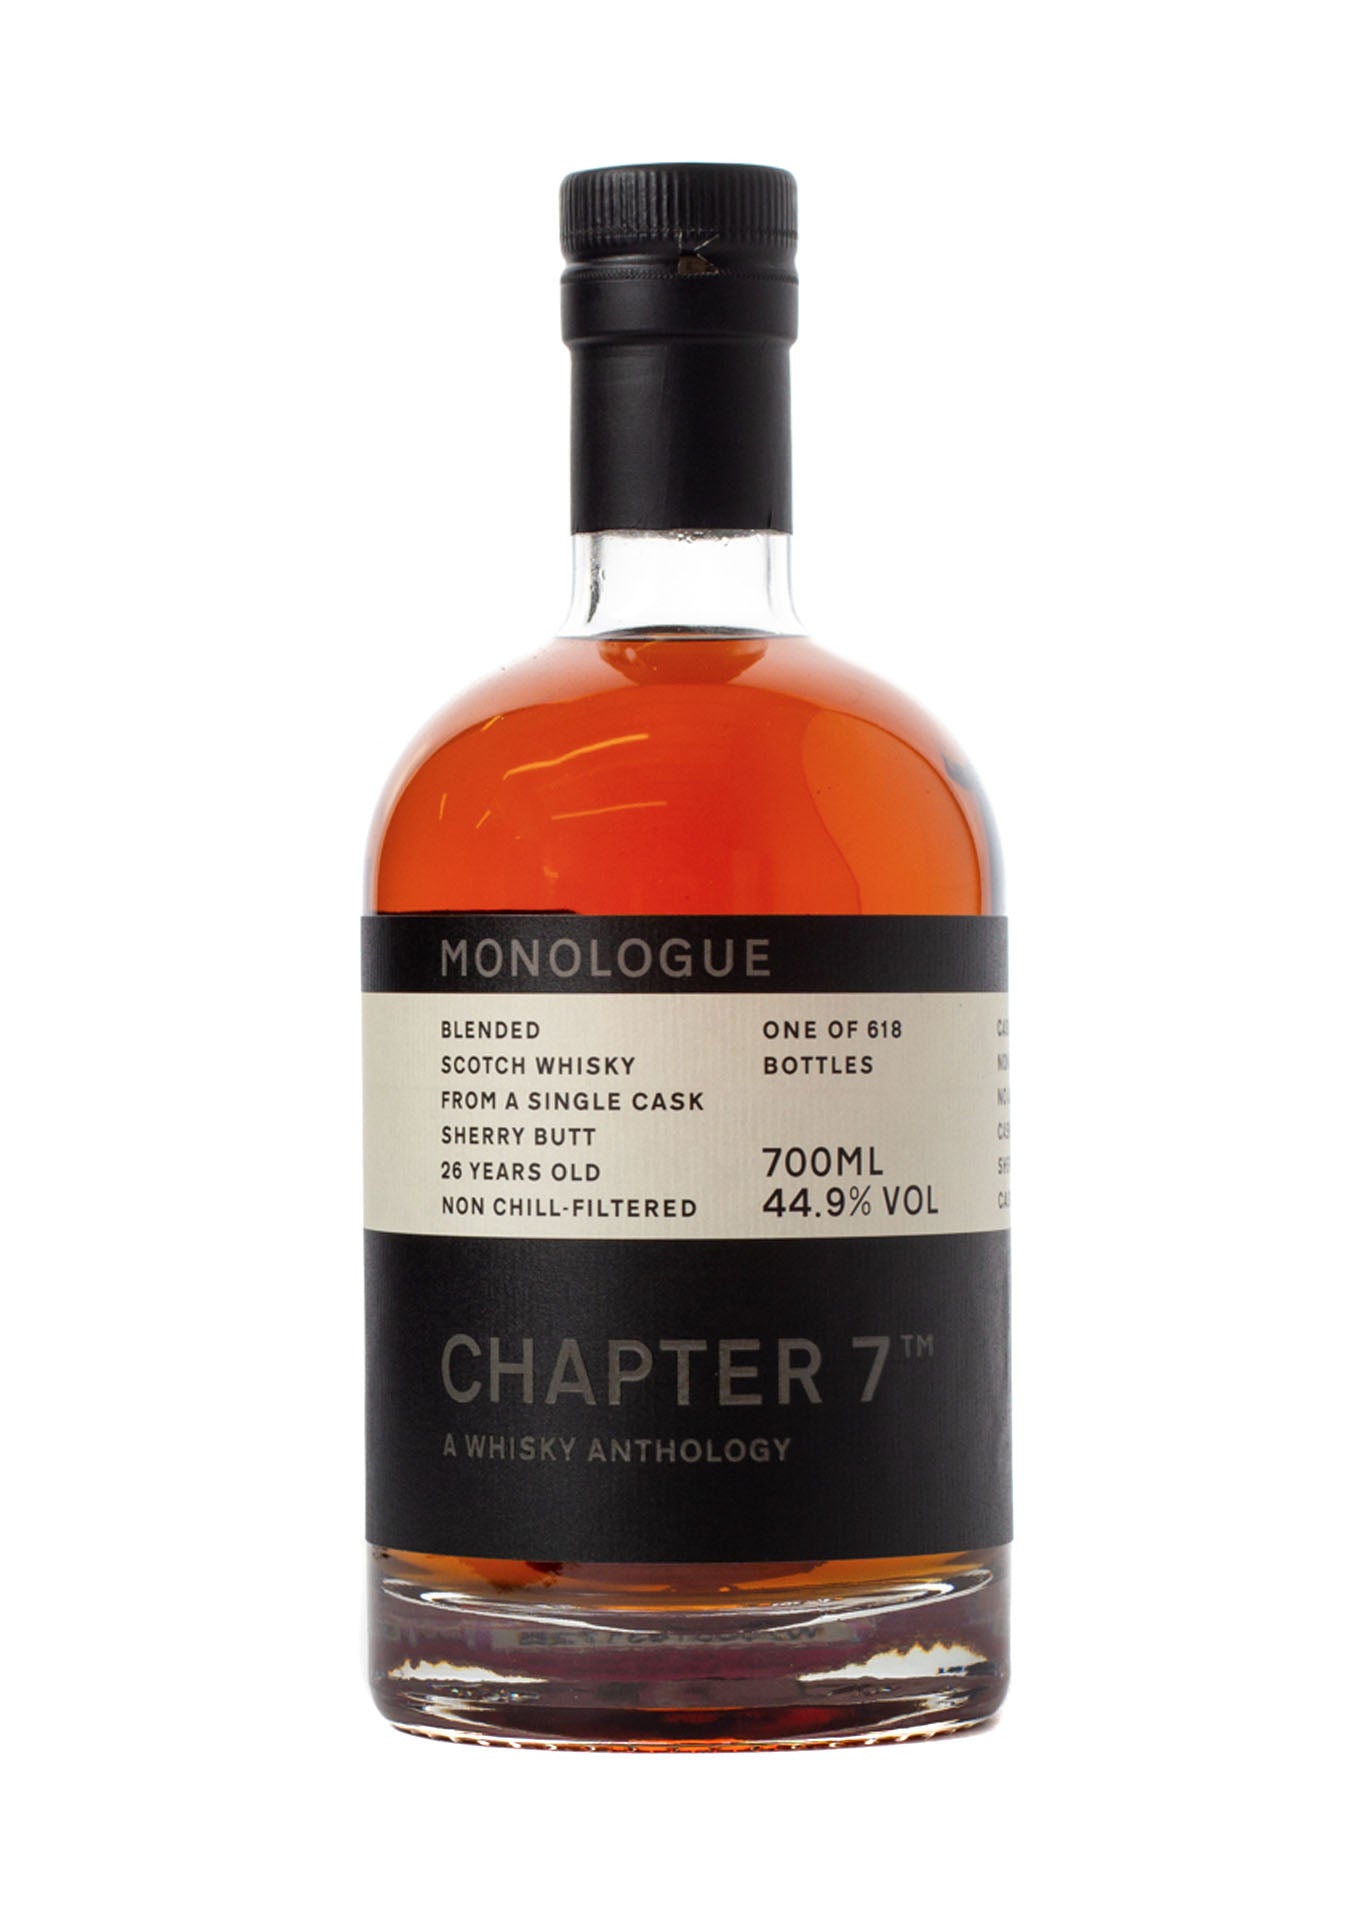 Chapter 7 Monologue 26 Year Old Blended Scotch Whisky